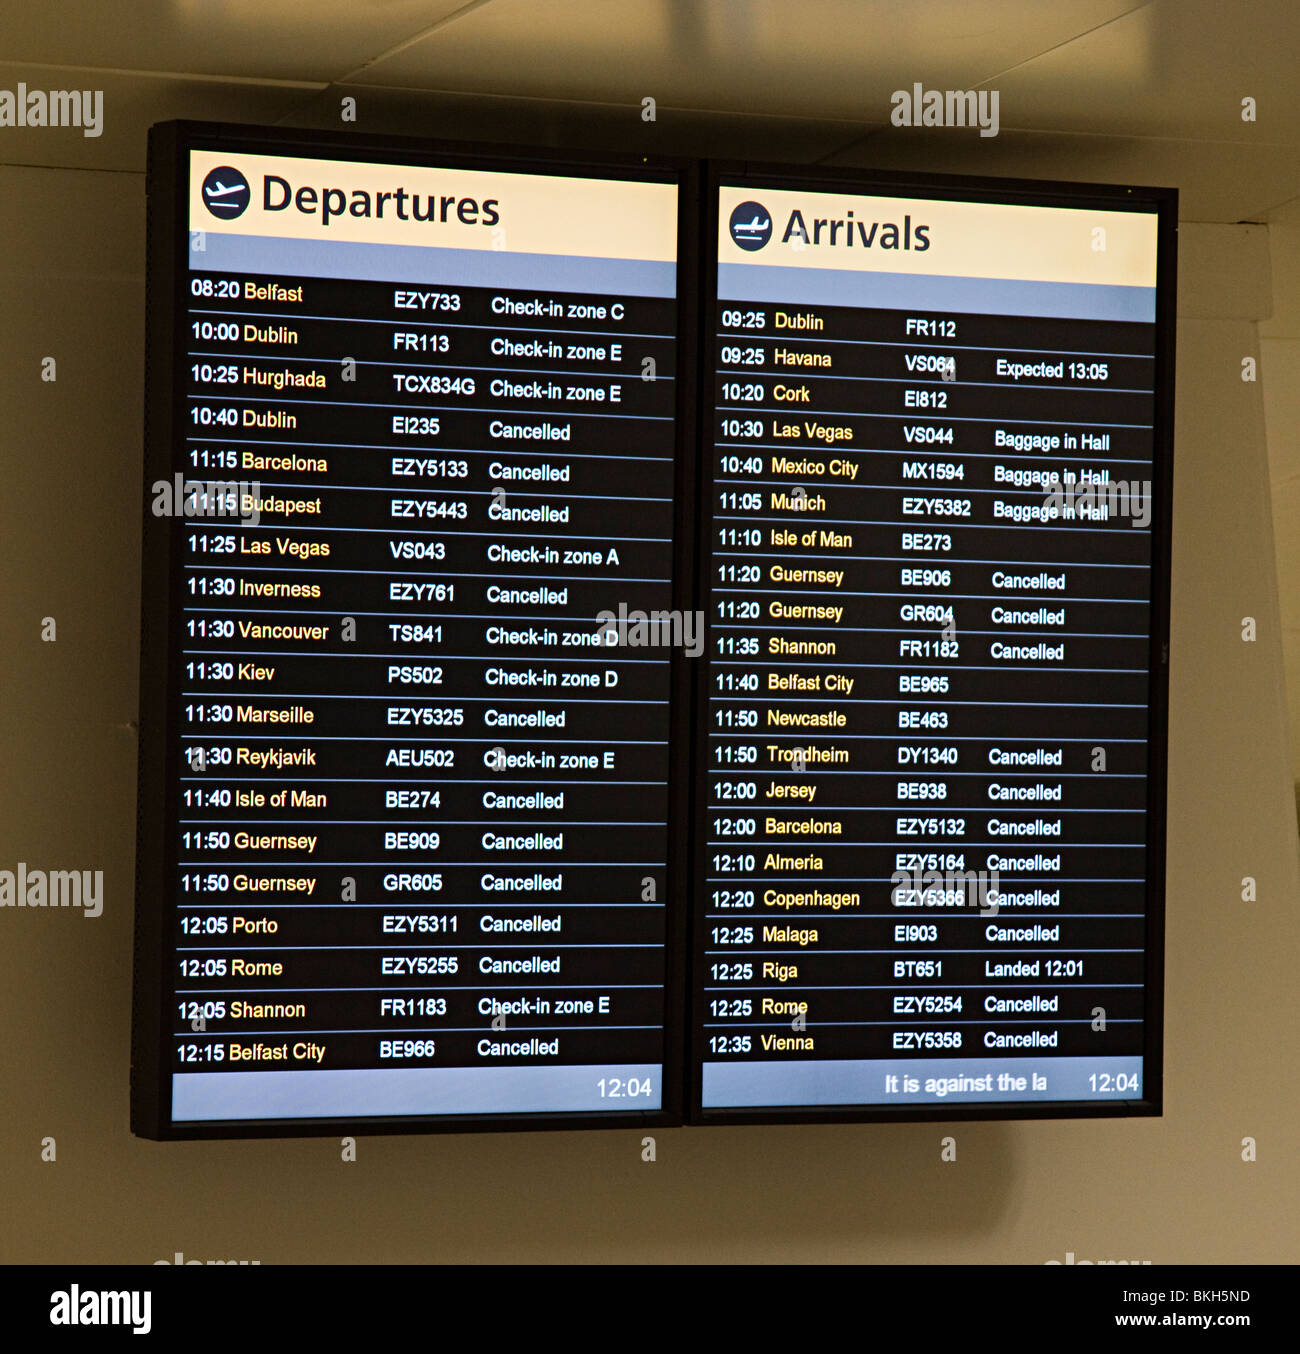 Departures and Arrivals board showing flights cancelled due to volcanic ash in the air Gatwick airport England UK Stock Photo